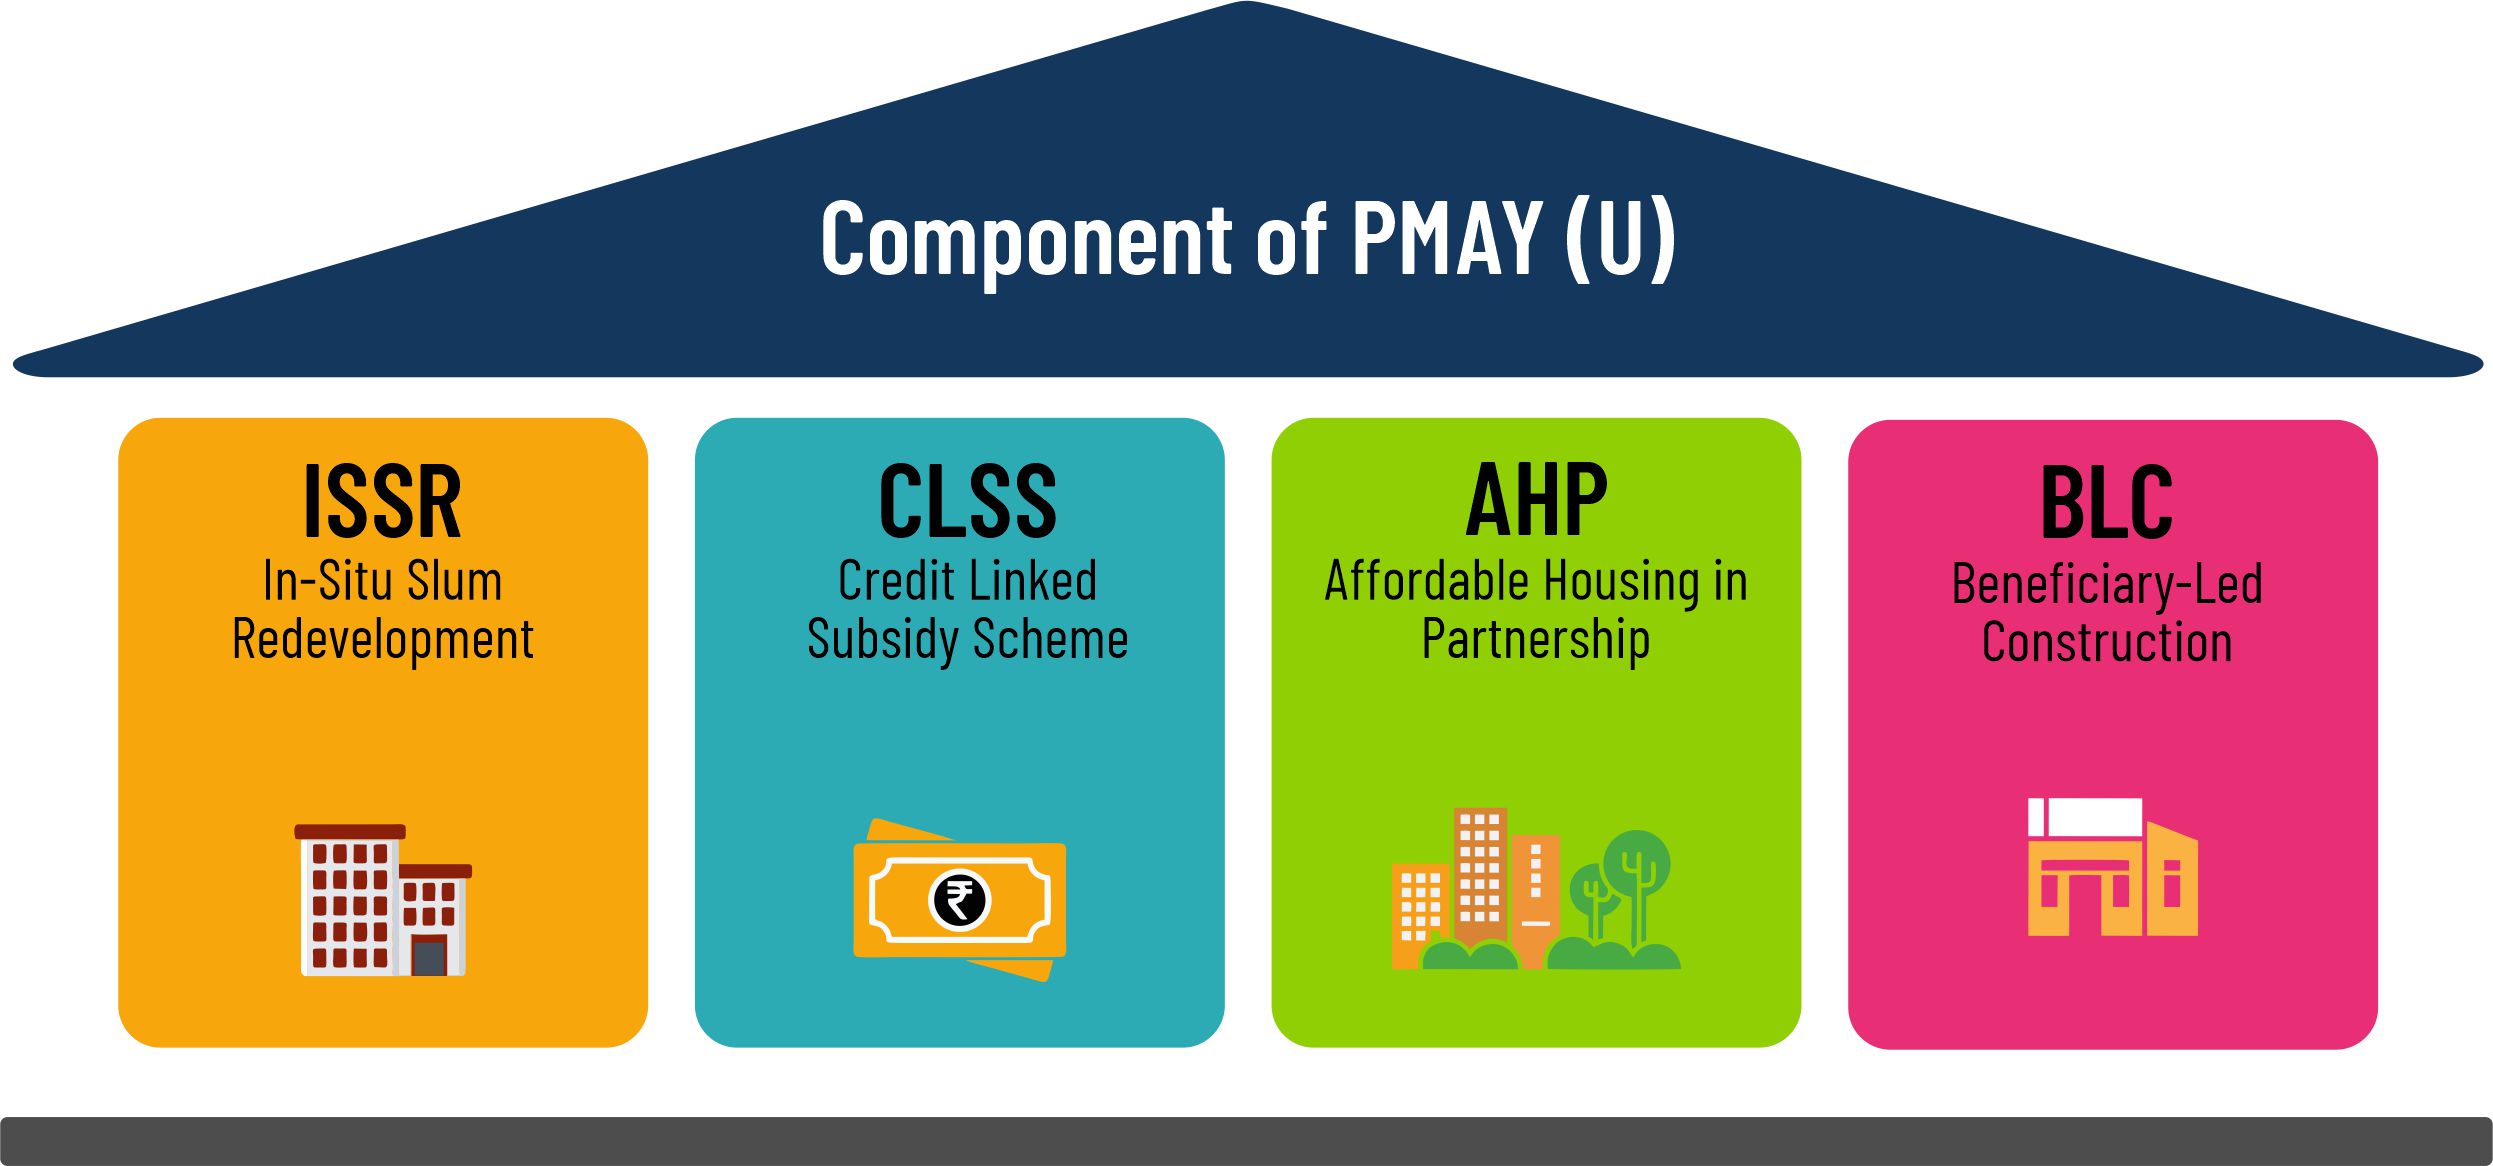 What Is the Pradhan Mantri Awas Yojana Scheme (PMAY) and How Can I Apply?